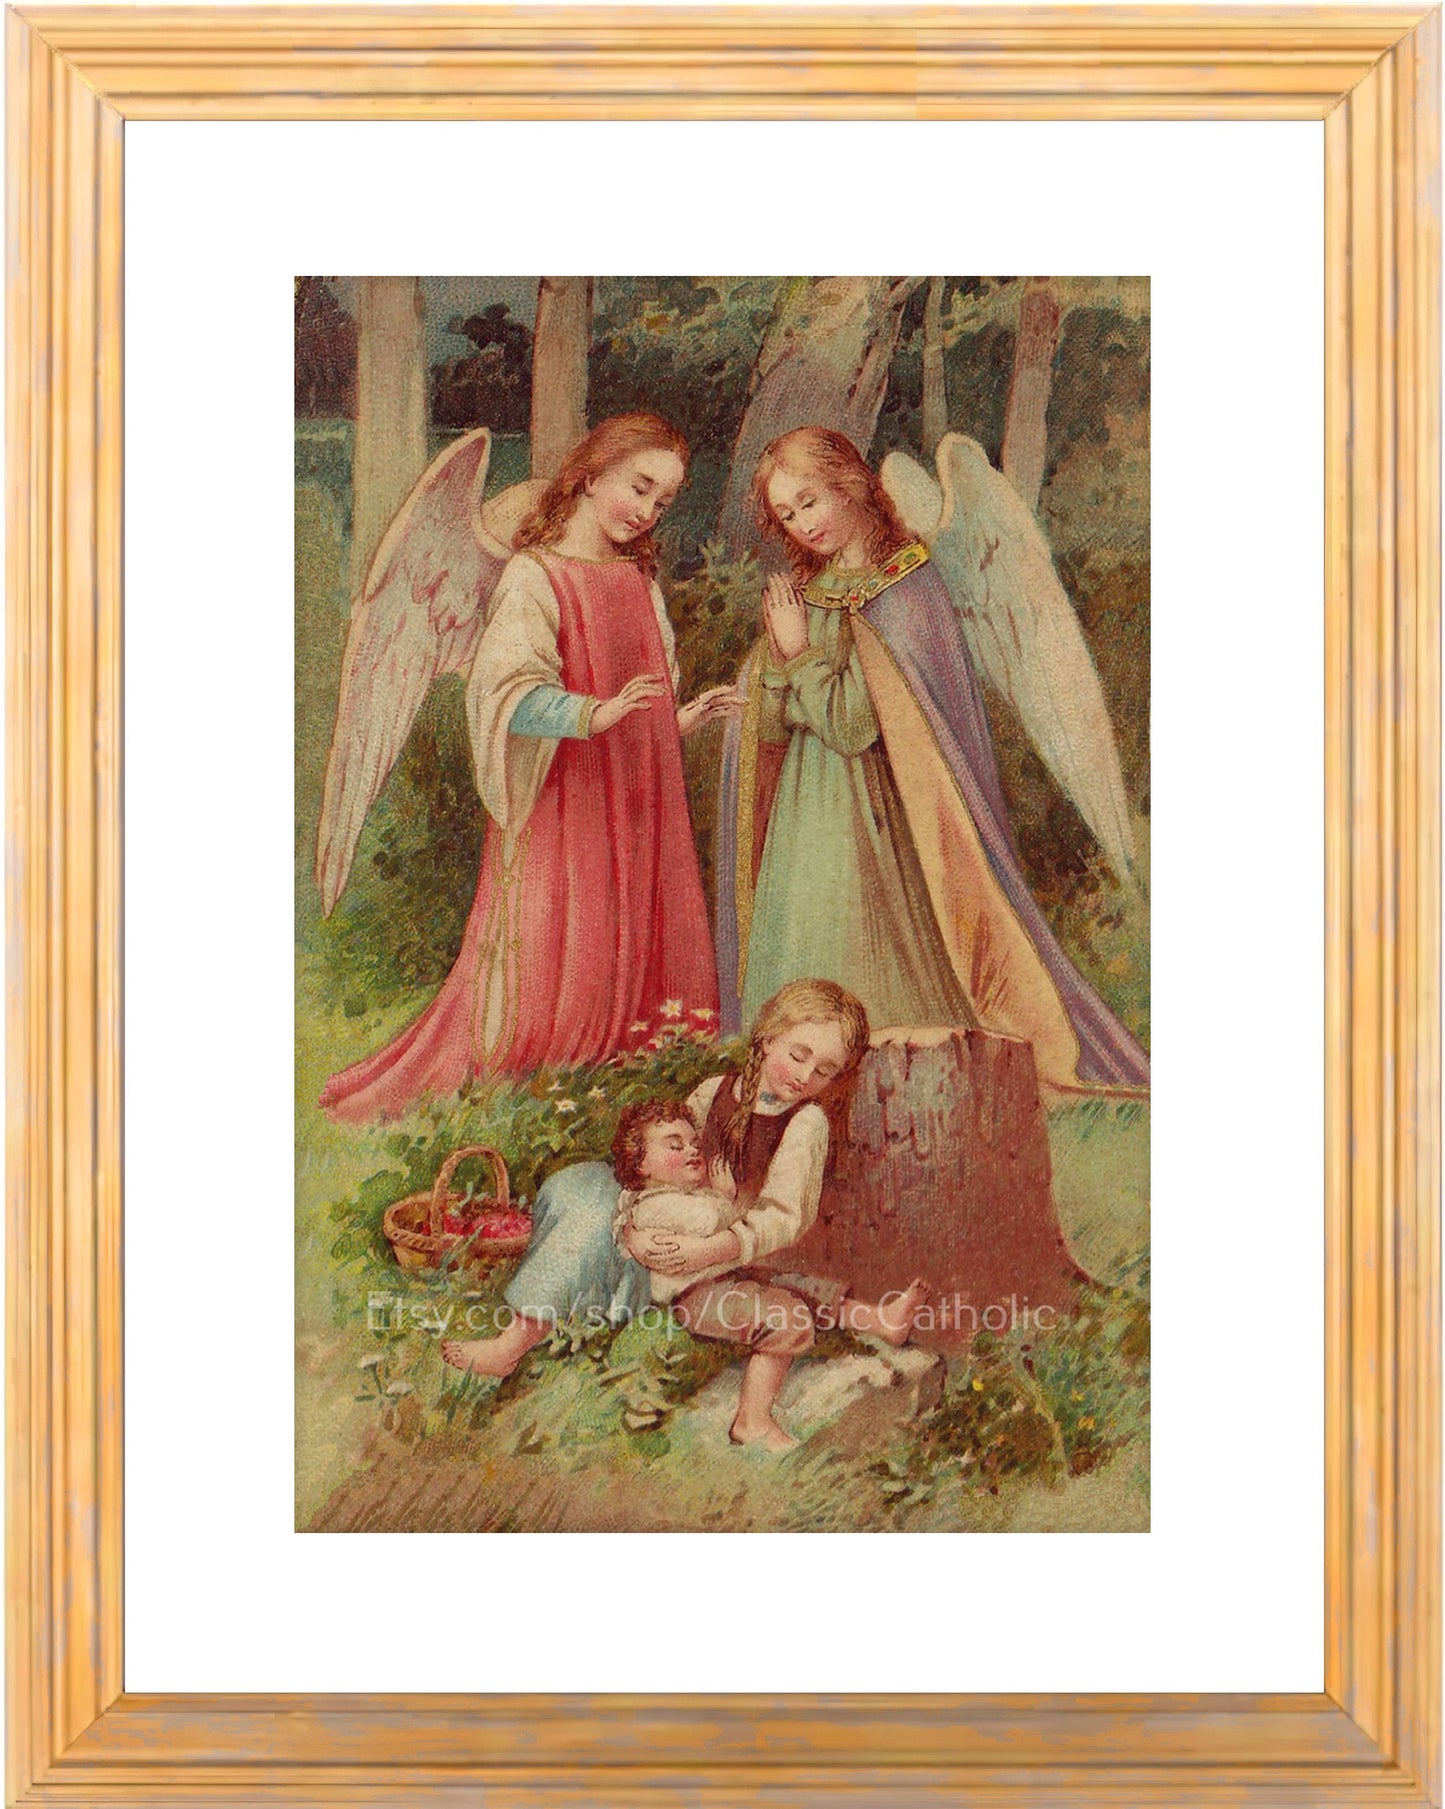 Guardian Angels – based on a Vintage Holy Card – Cozy – Catholic Art Print – Archival Quality